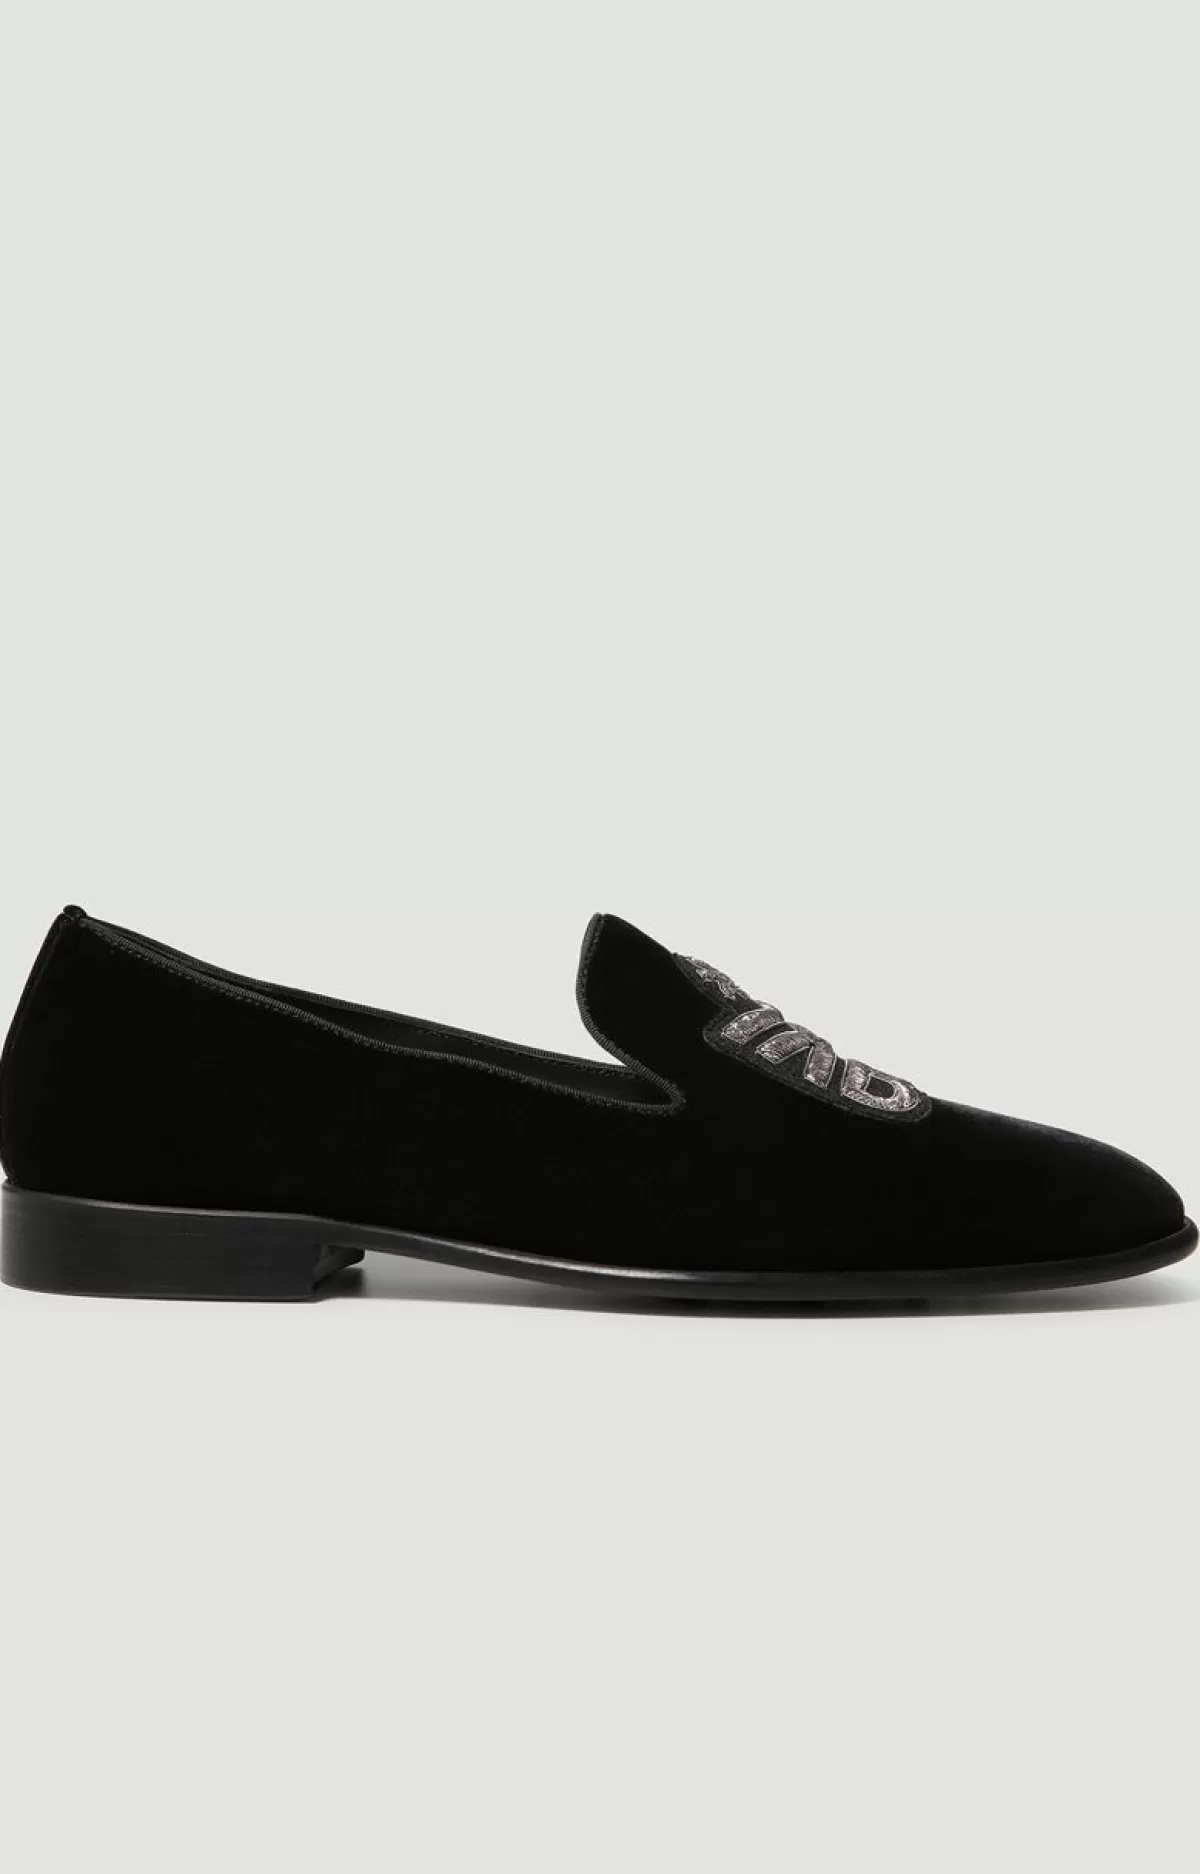 Bikkembergs Men'S Moccasins With Embroidery Black Best